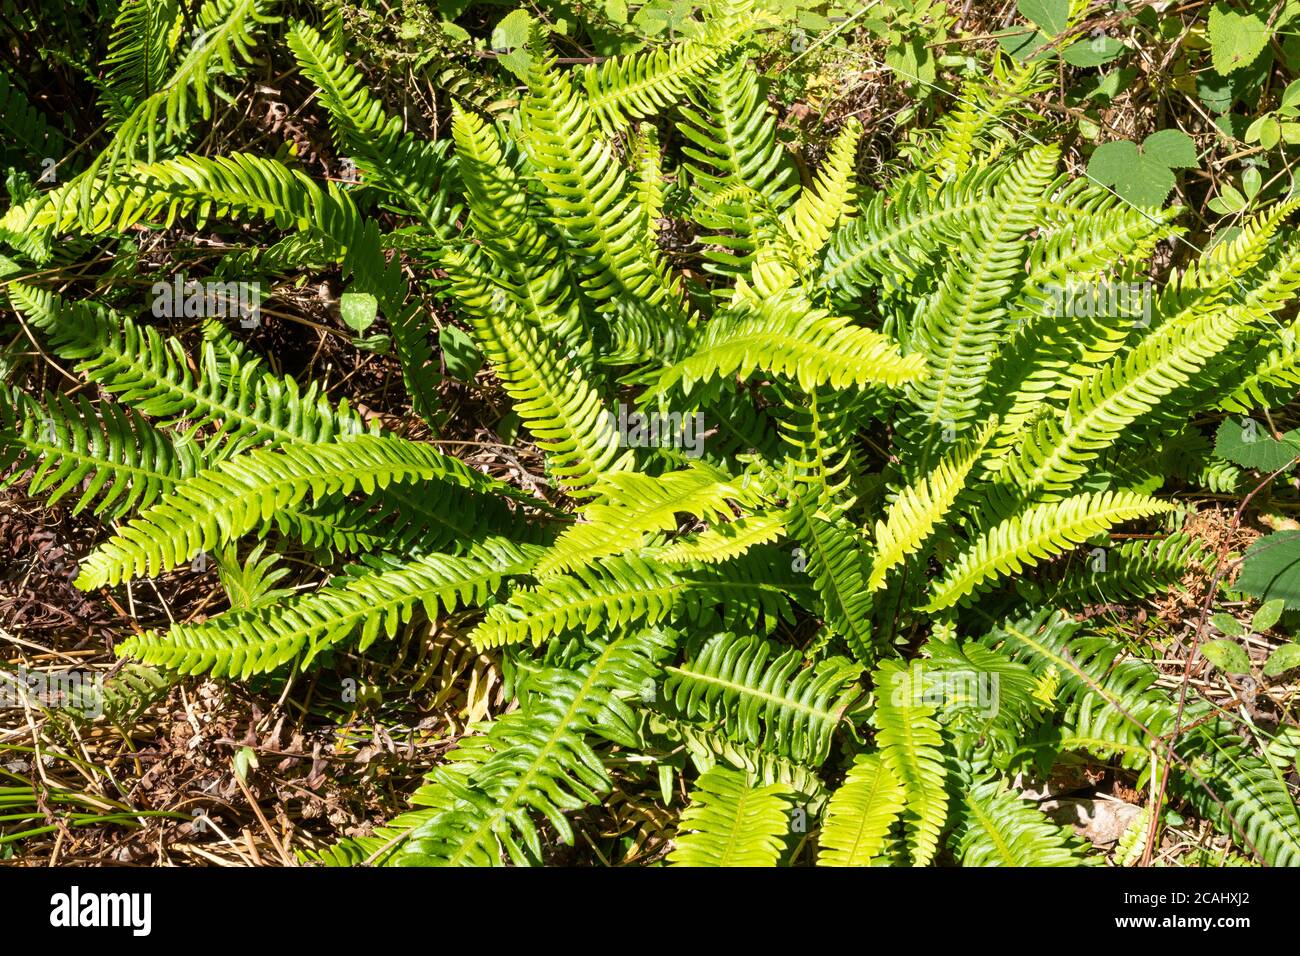 Hard fern (Blechnum spicant), also called deer fern, a vivid green fern that is evergreen and has two types of fronds, UK Stock Photo